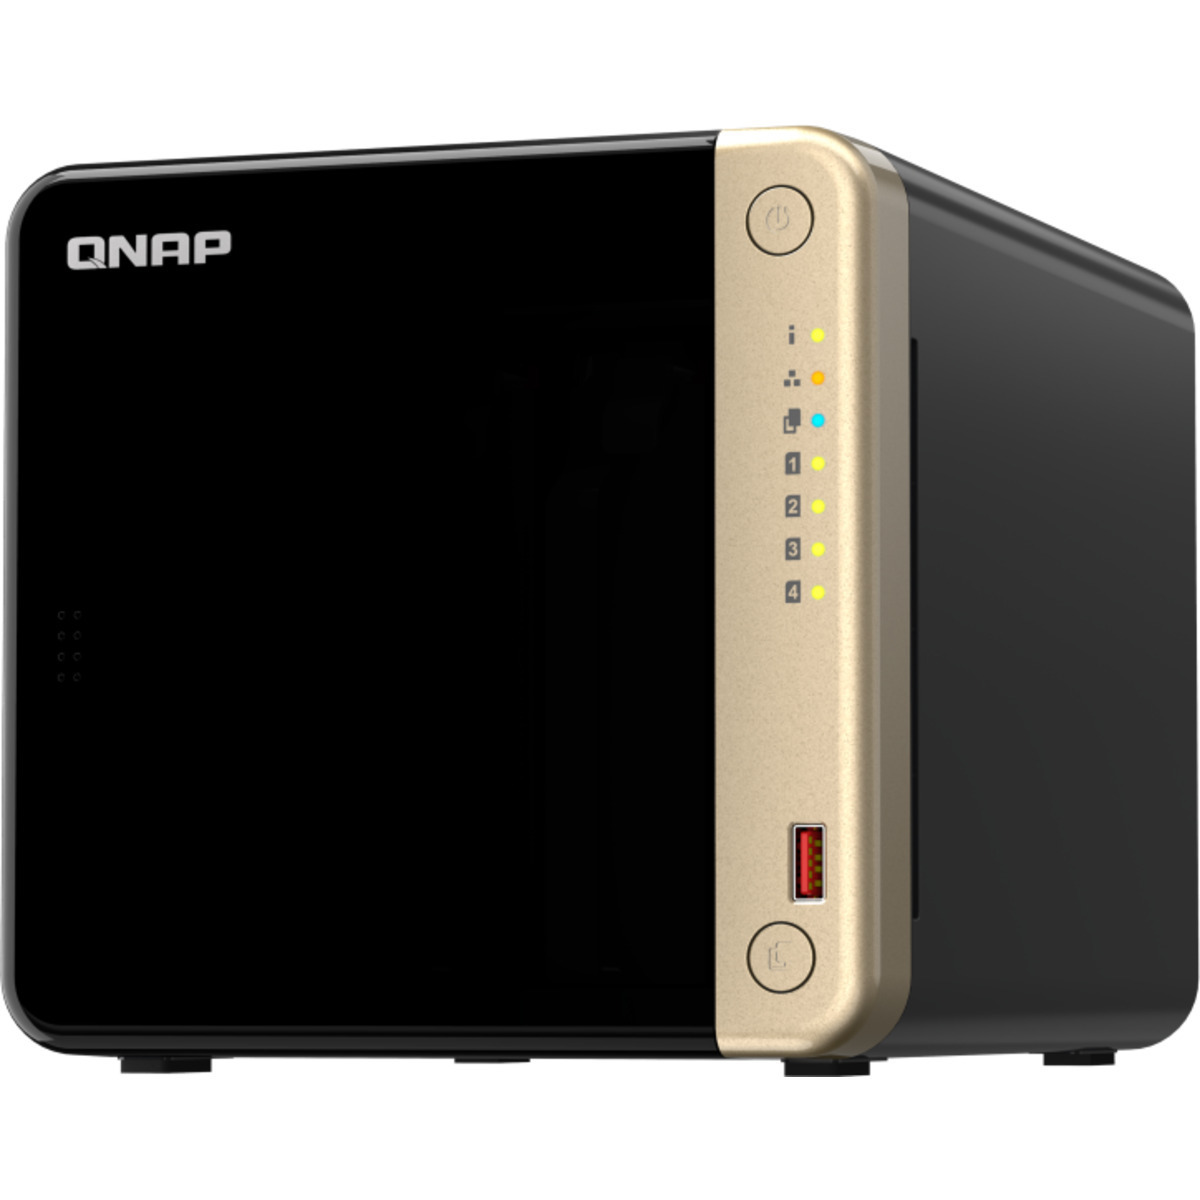 QNAP TS-464 72tb 4-Bay Desktop Multimedia / Power User / Business NAS - Network Attached Storage Device 3x24tb Seagate EXOS X24 ST24000NM002H 3.5 7200rpm SATA 6Gb/s HDD ENTERPRISE Class Drives Installed - Burn-In Tested TS-464